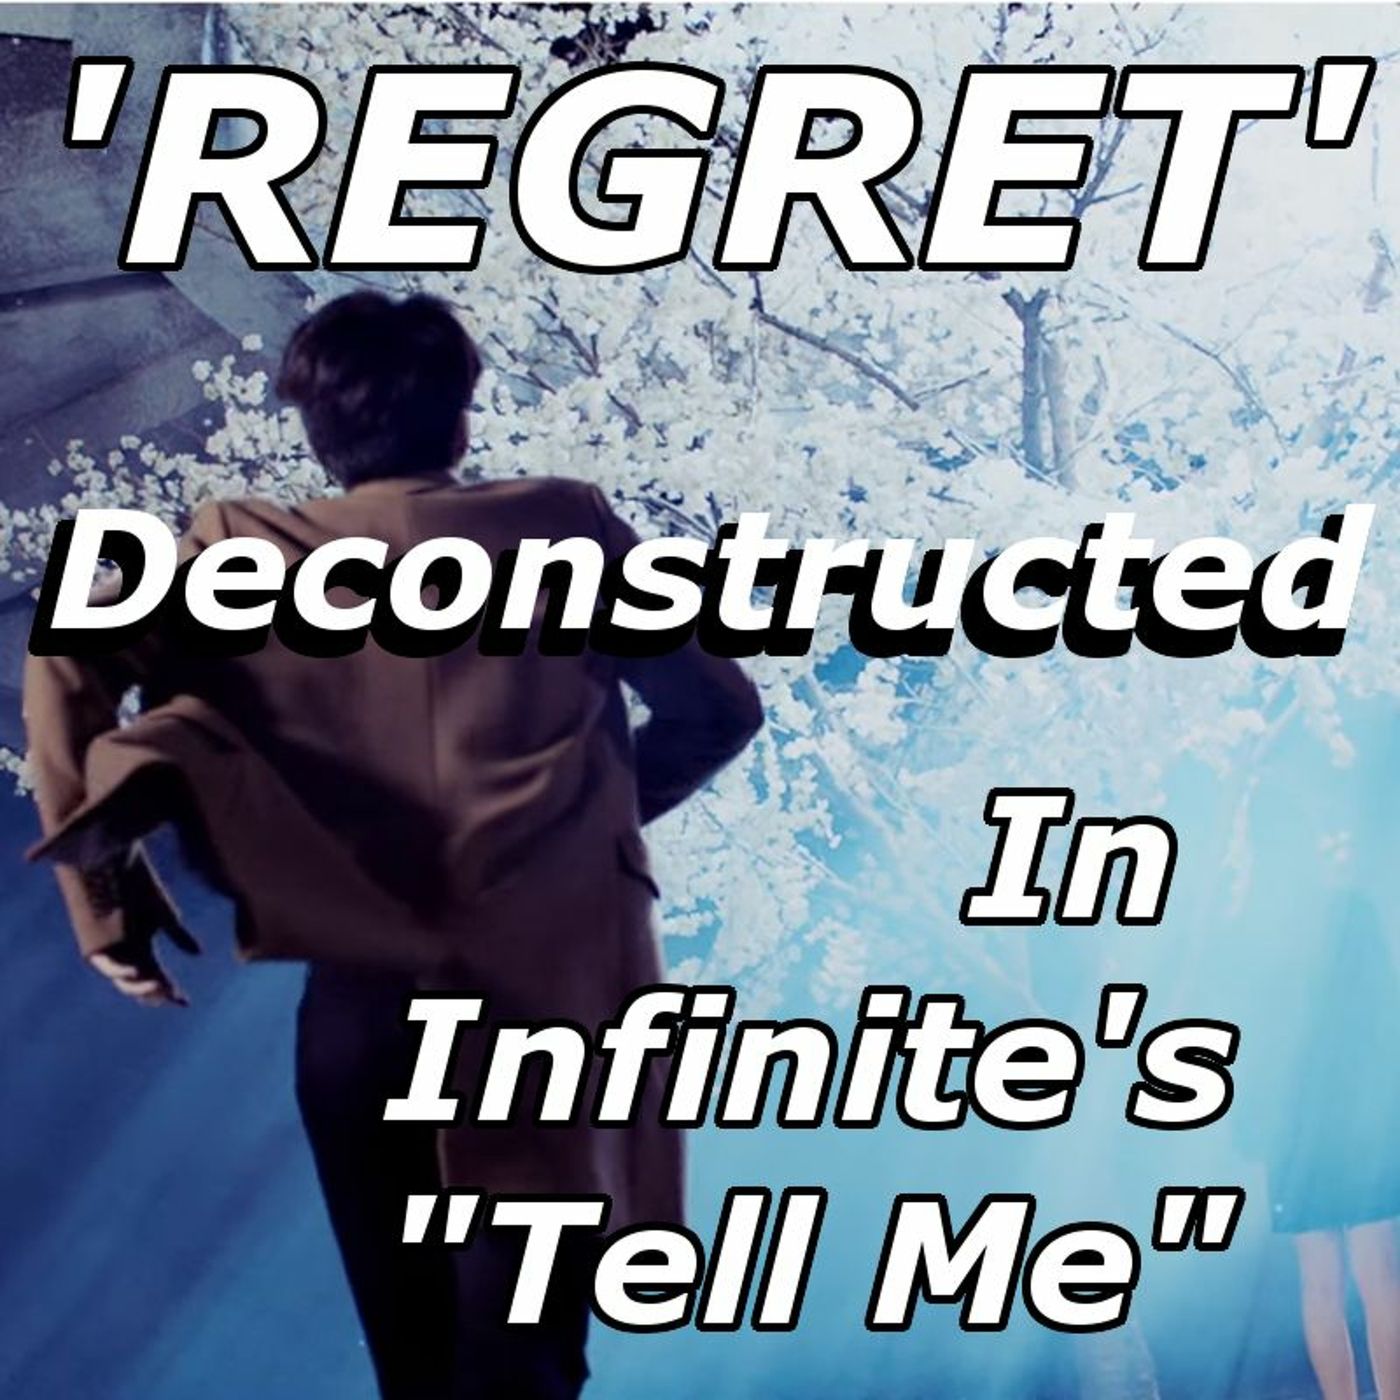 'Regret' Deconstructed In Infinite's “Tell Me”